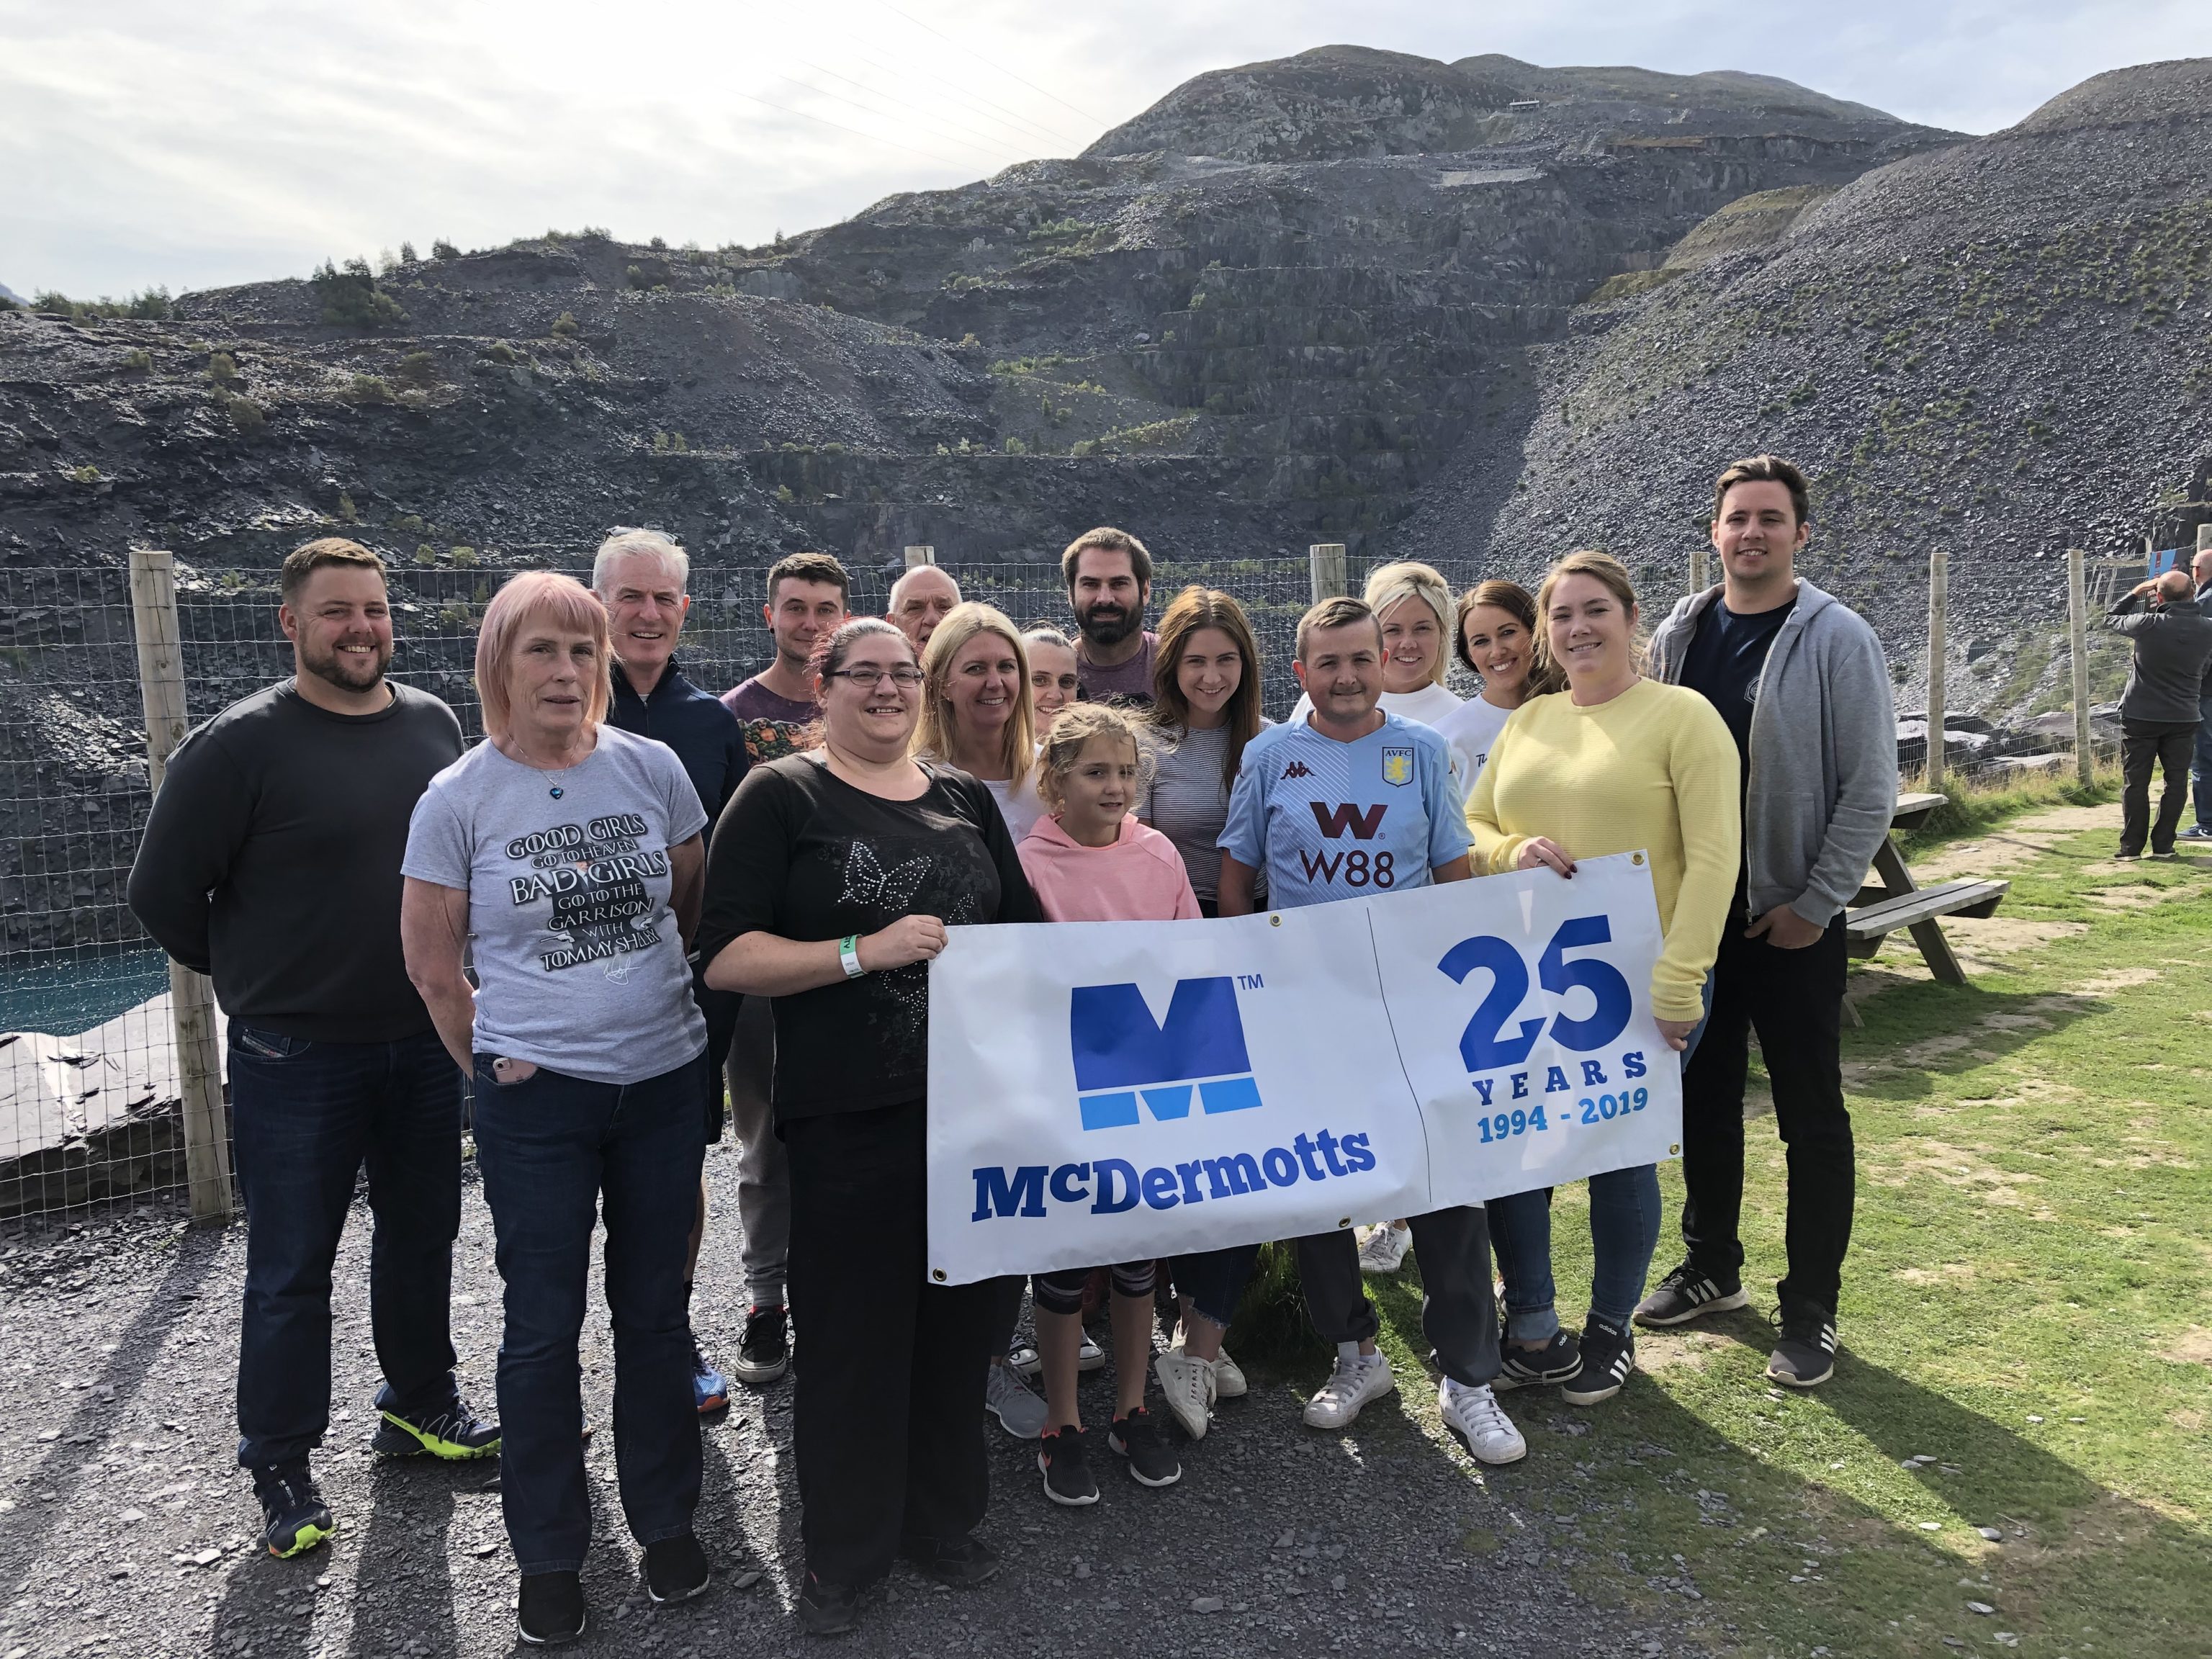 The 25th anniversary celebrations continued on Saturday when sixteen of McDermotts’ bravest staff travelled to Wales to take on the Velocity 2 zip wire challenge.